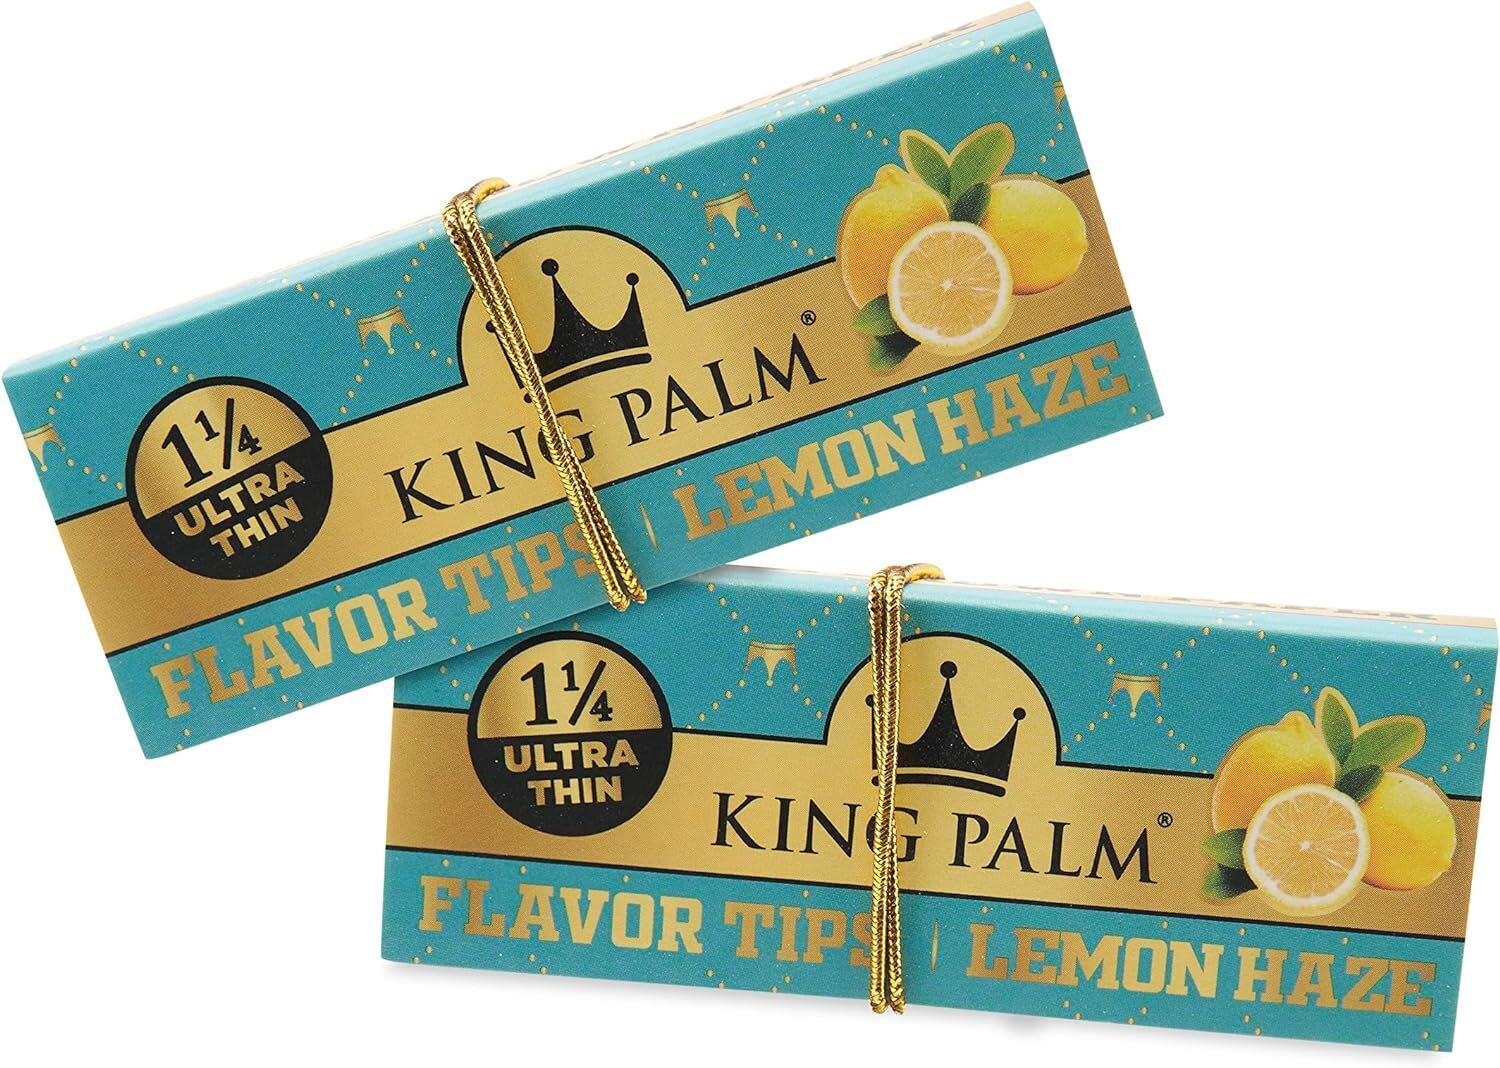 King Palm | 1 1/4 | Lemon Haze | Papers with Prerolled Filter Tips | 2 Booklets